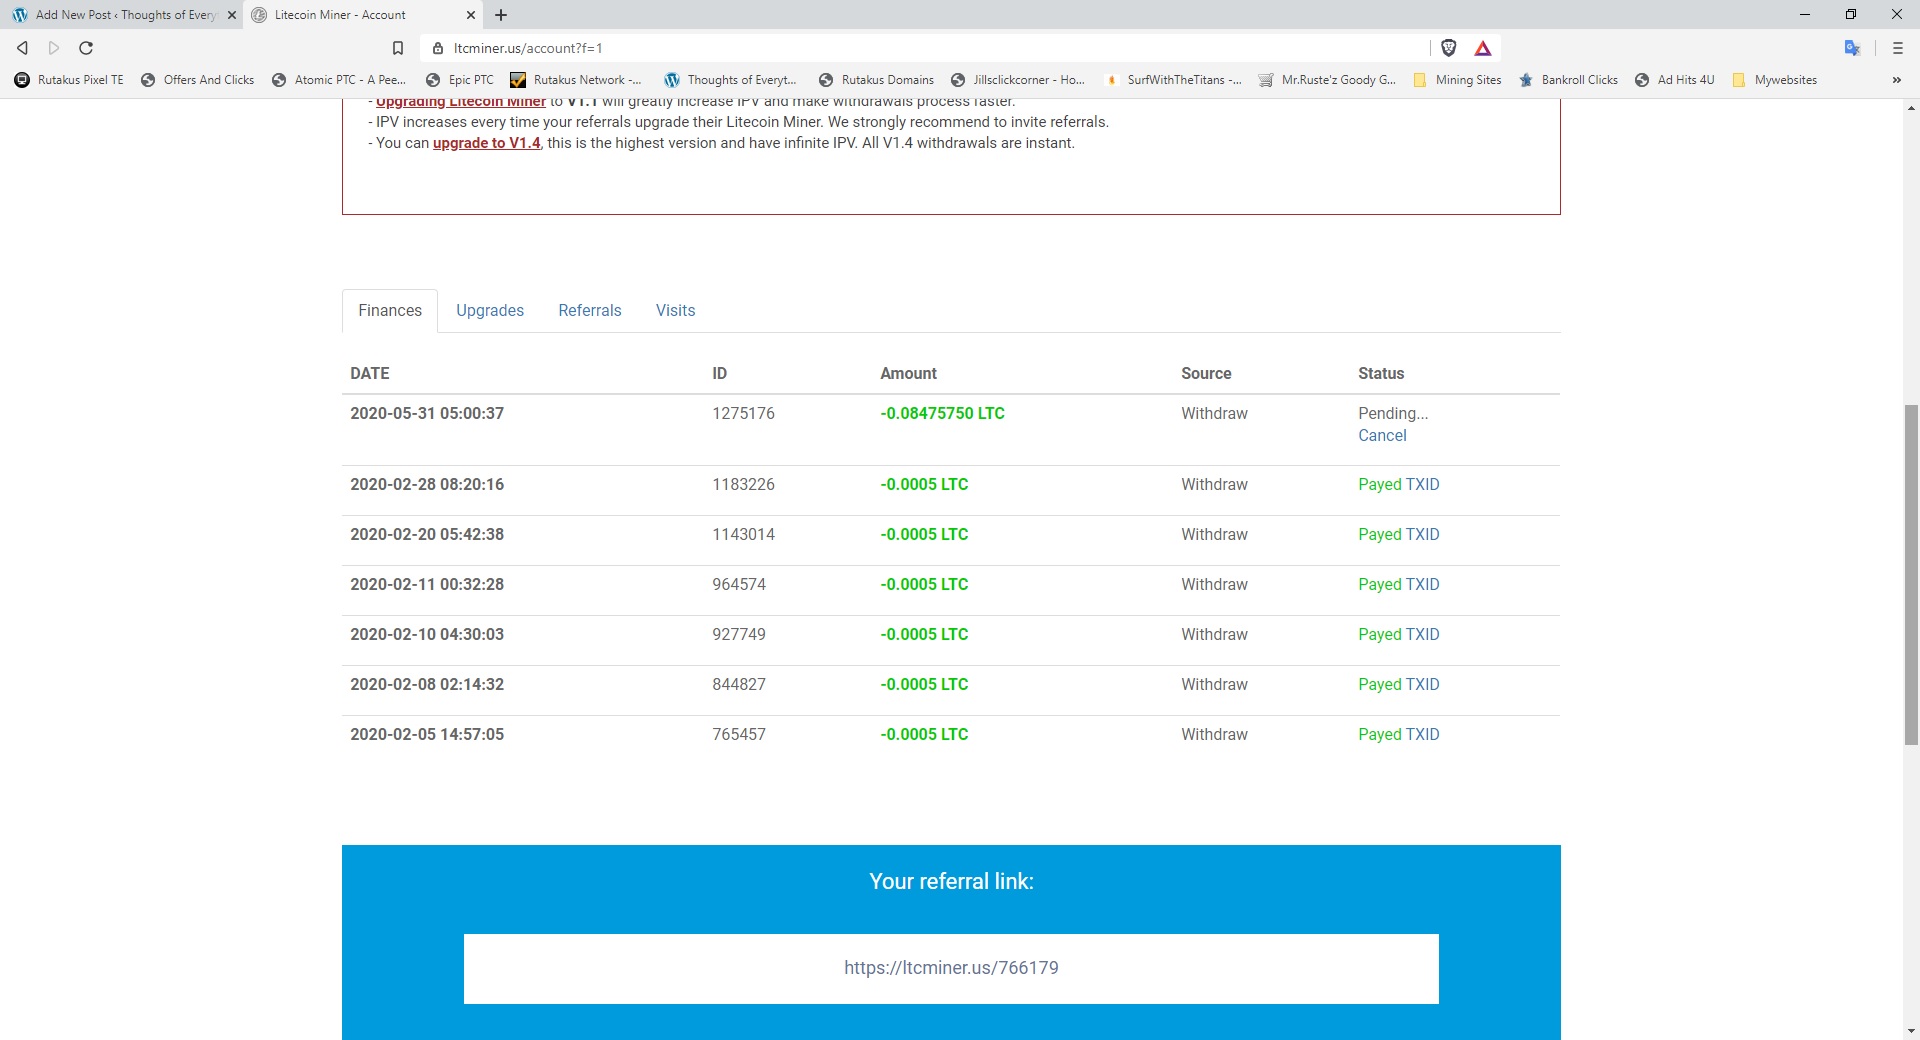 Cloud Mining Testing LTCminer.us (Litecoin Miner) Added To ...